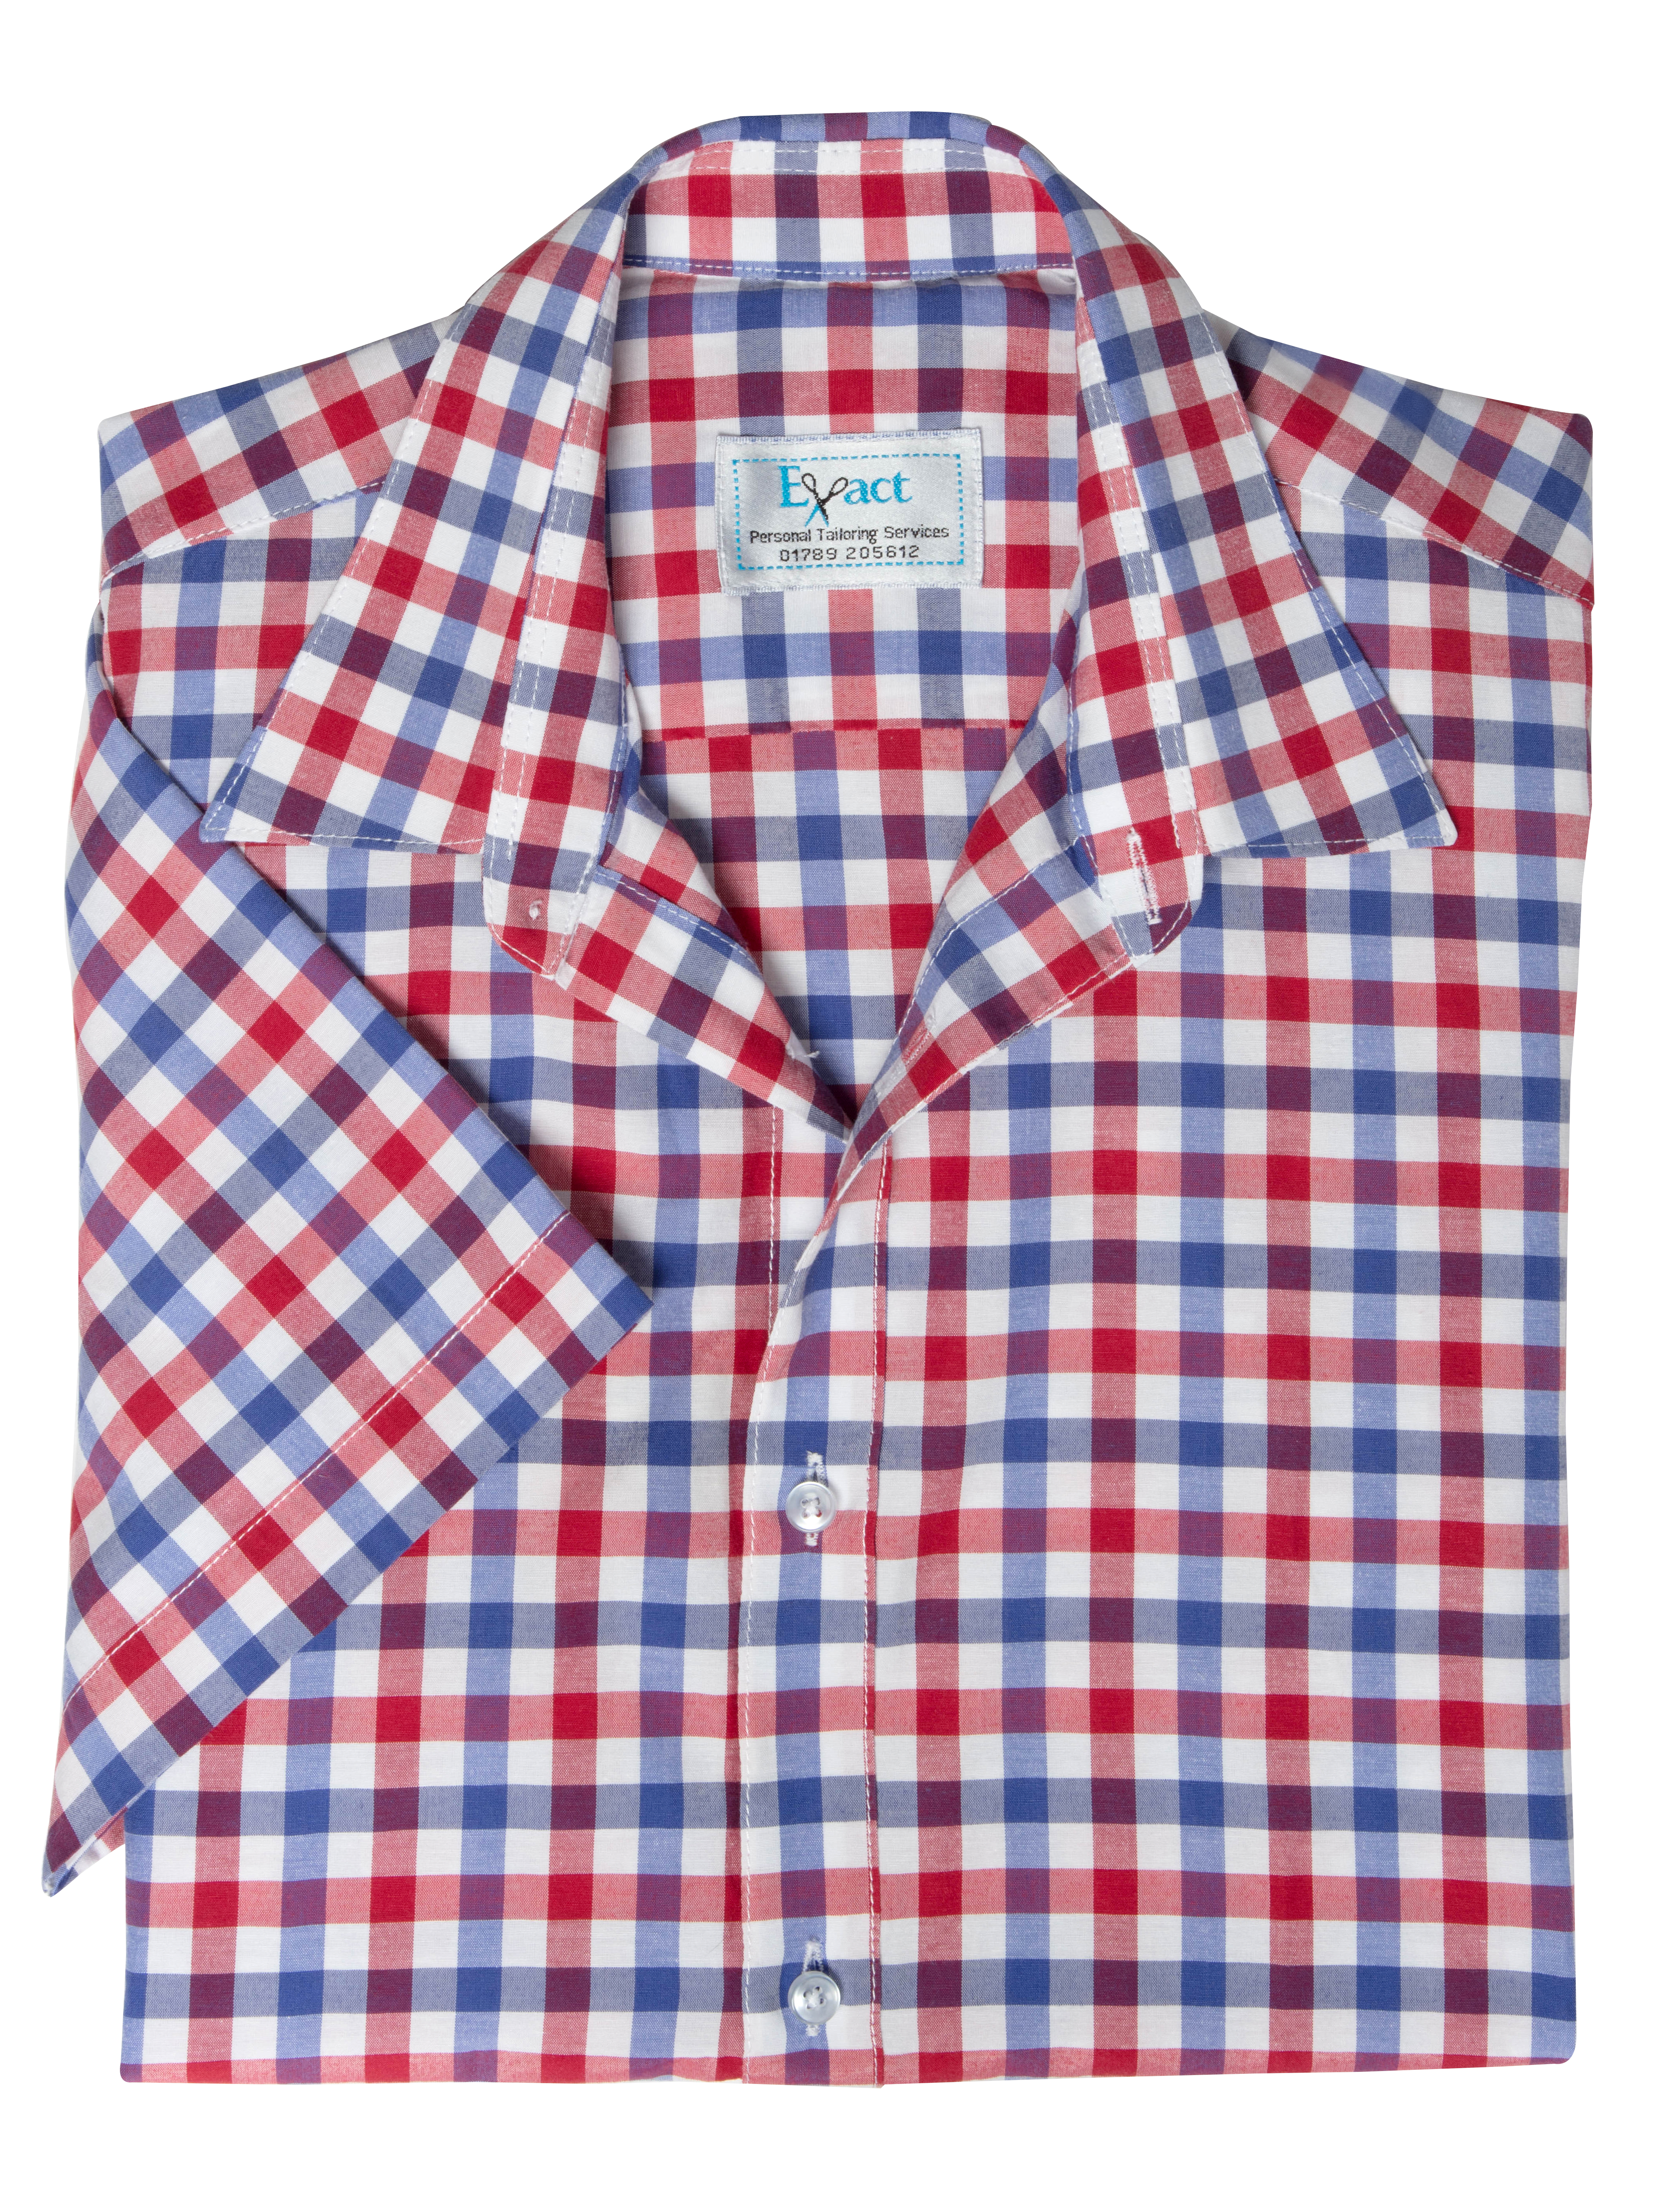 Buy tailor made shirts online - Texas Country Checks (CLEARANCE) - Red and Blue Check